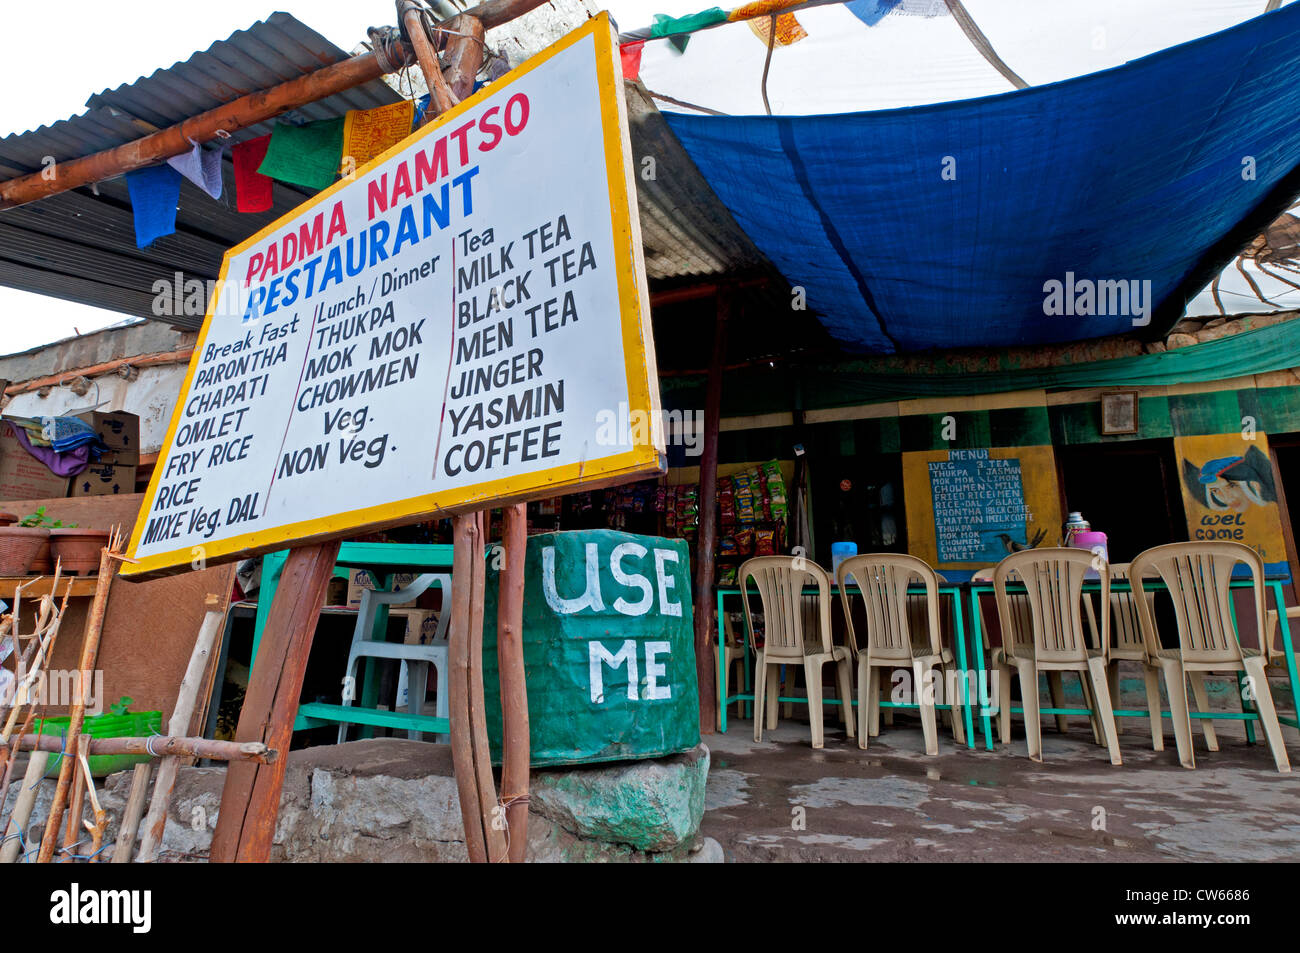 Padma Namtso Restaurant and sign & menu in a town on the Leh-Manali Highway in Ladakh, India Stock Photo